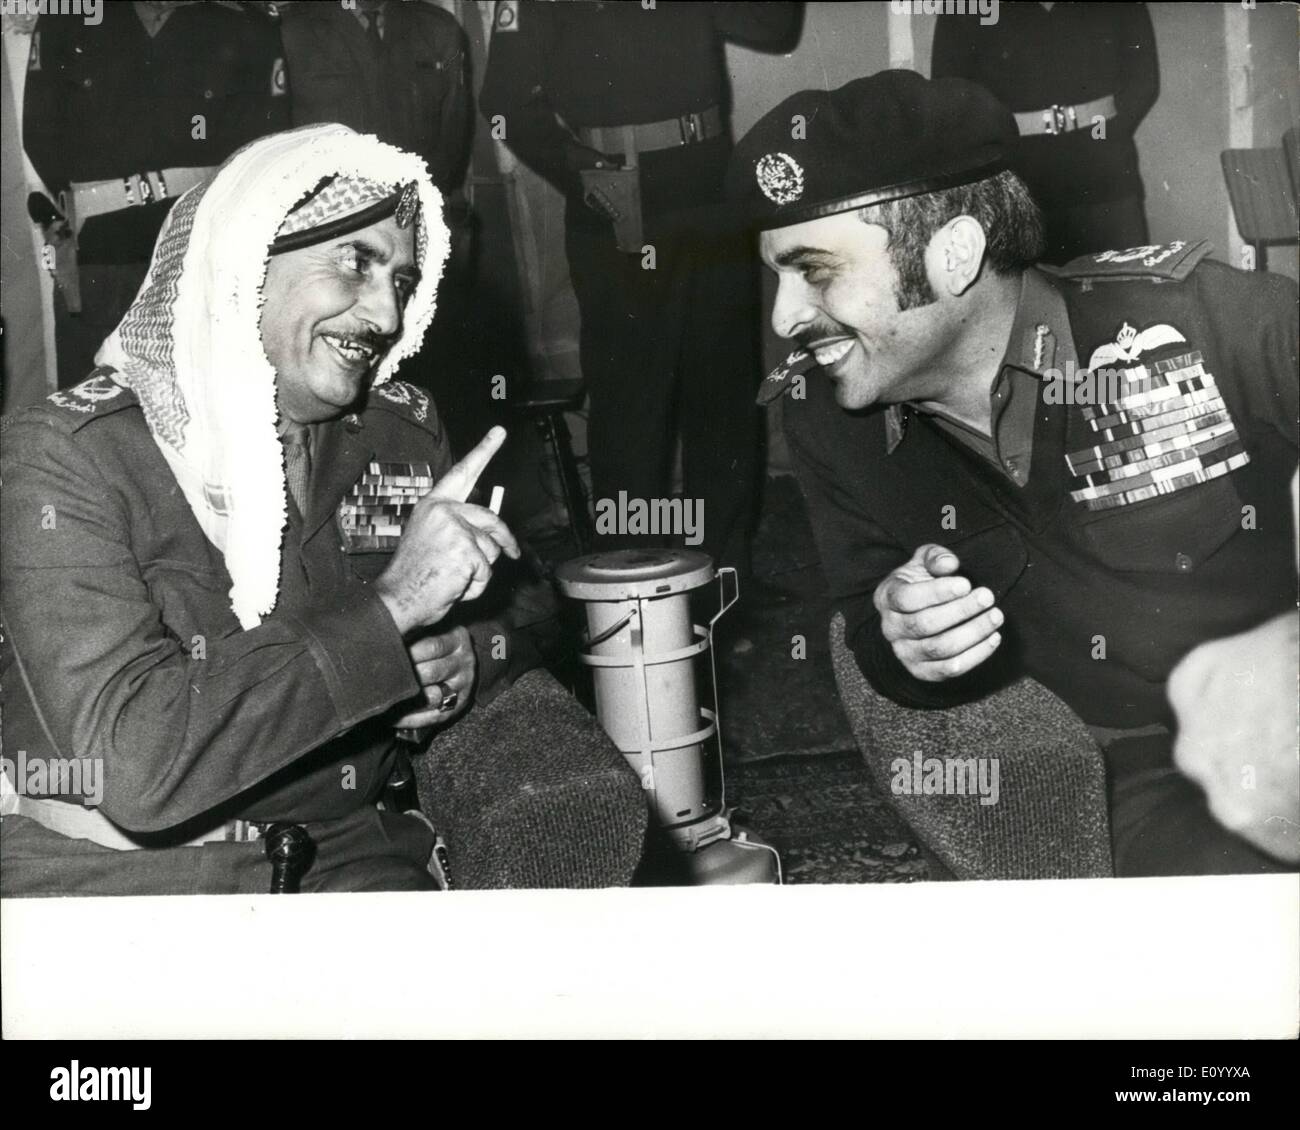 Dec. 12, 1971 - King Hussein visits first Royal armoured battalion.'' King Hussein of Jordan recently visited the Royal Armoured Battalion, on the occasion of the battalion's 21st. anniversary of its founding. Photo shows King Hussein (right) talking with Marshall Habes al-Majali, Commander-in-Chief of the Jordanian Armed Force, during the anniversary celebrations. Stock Photo